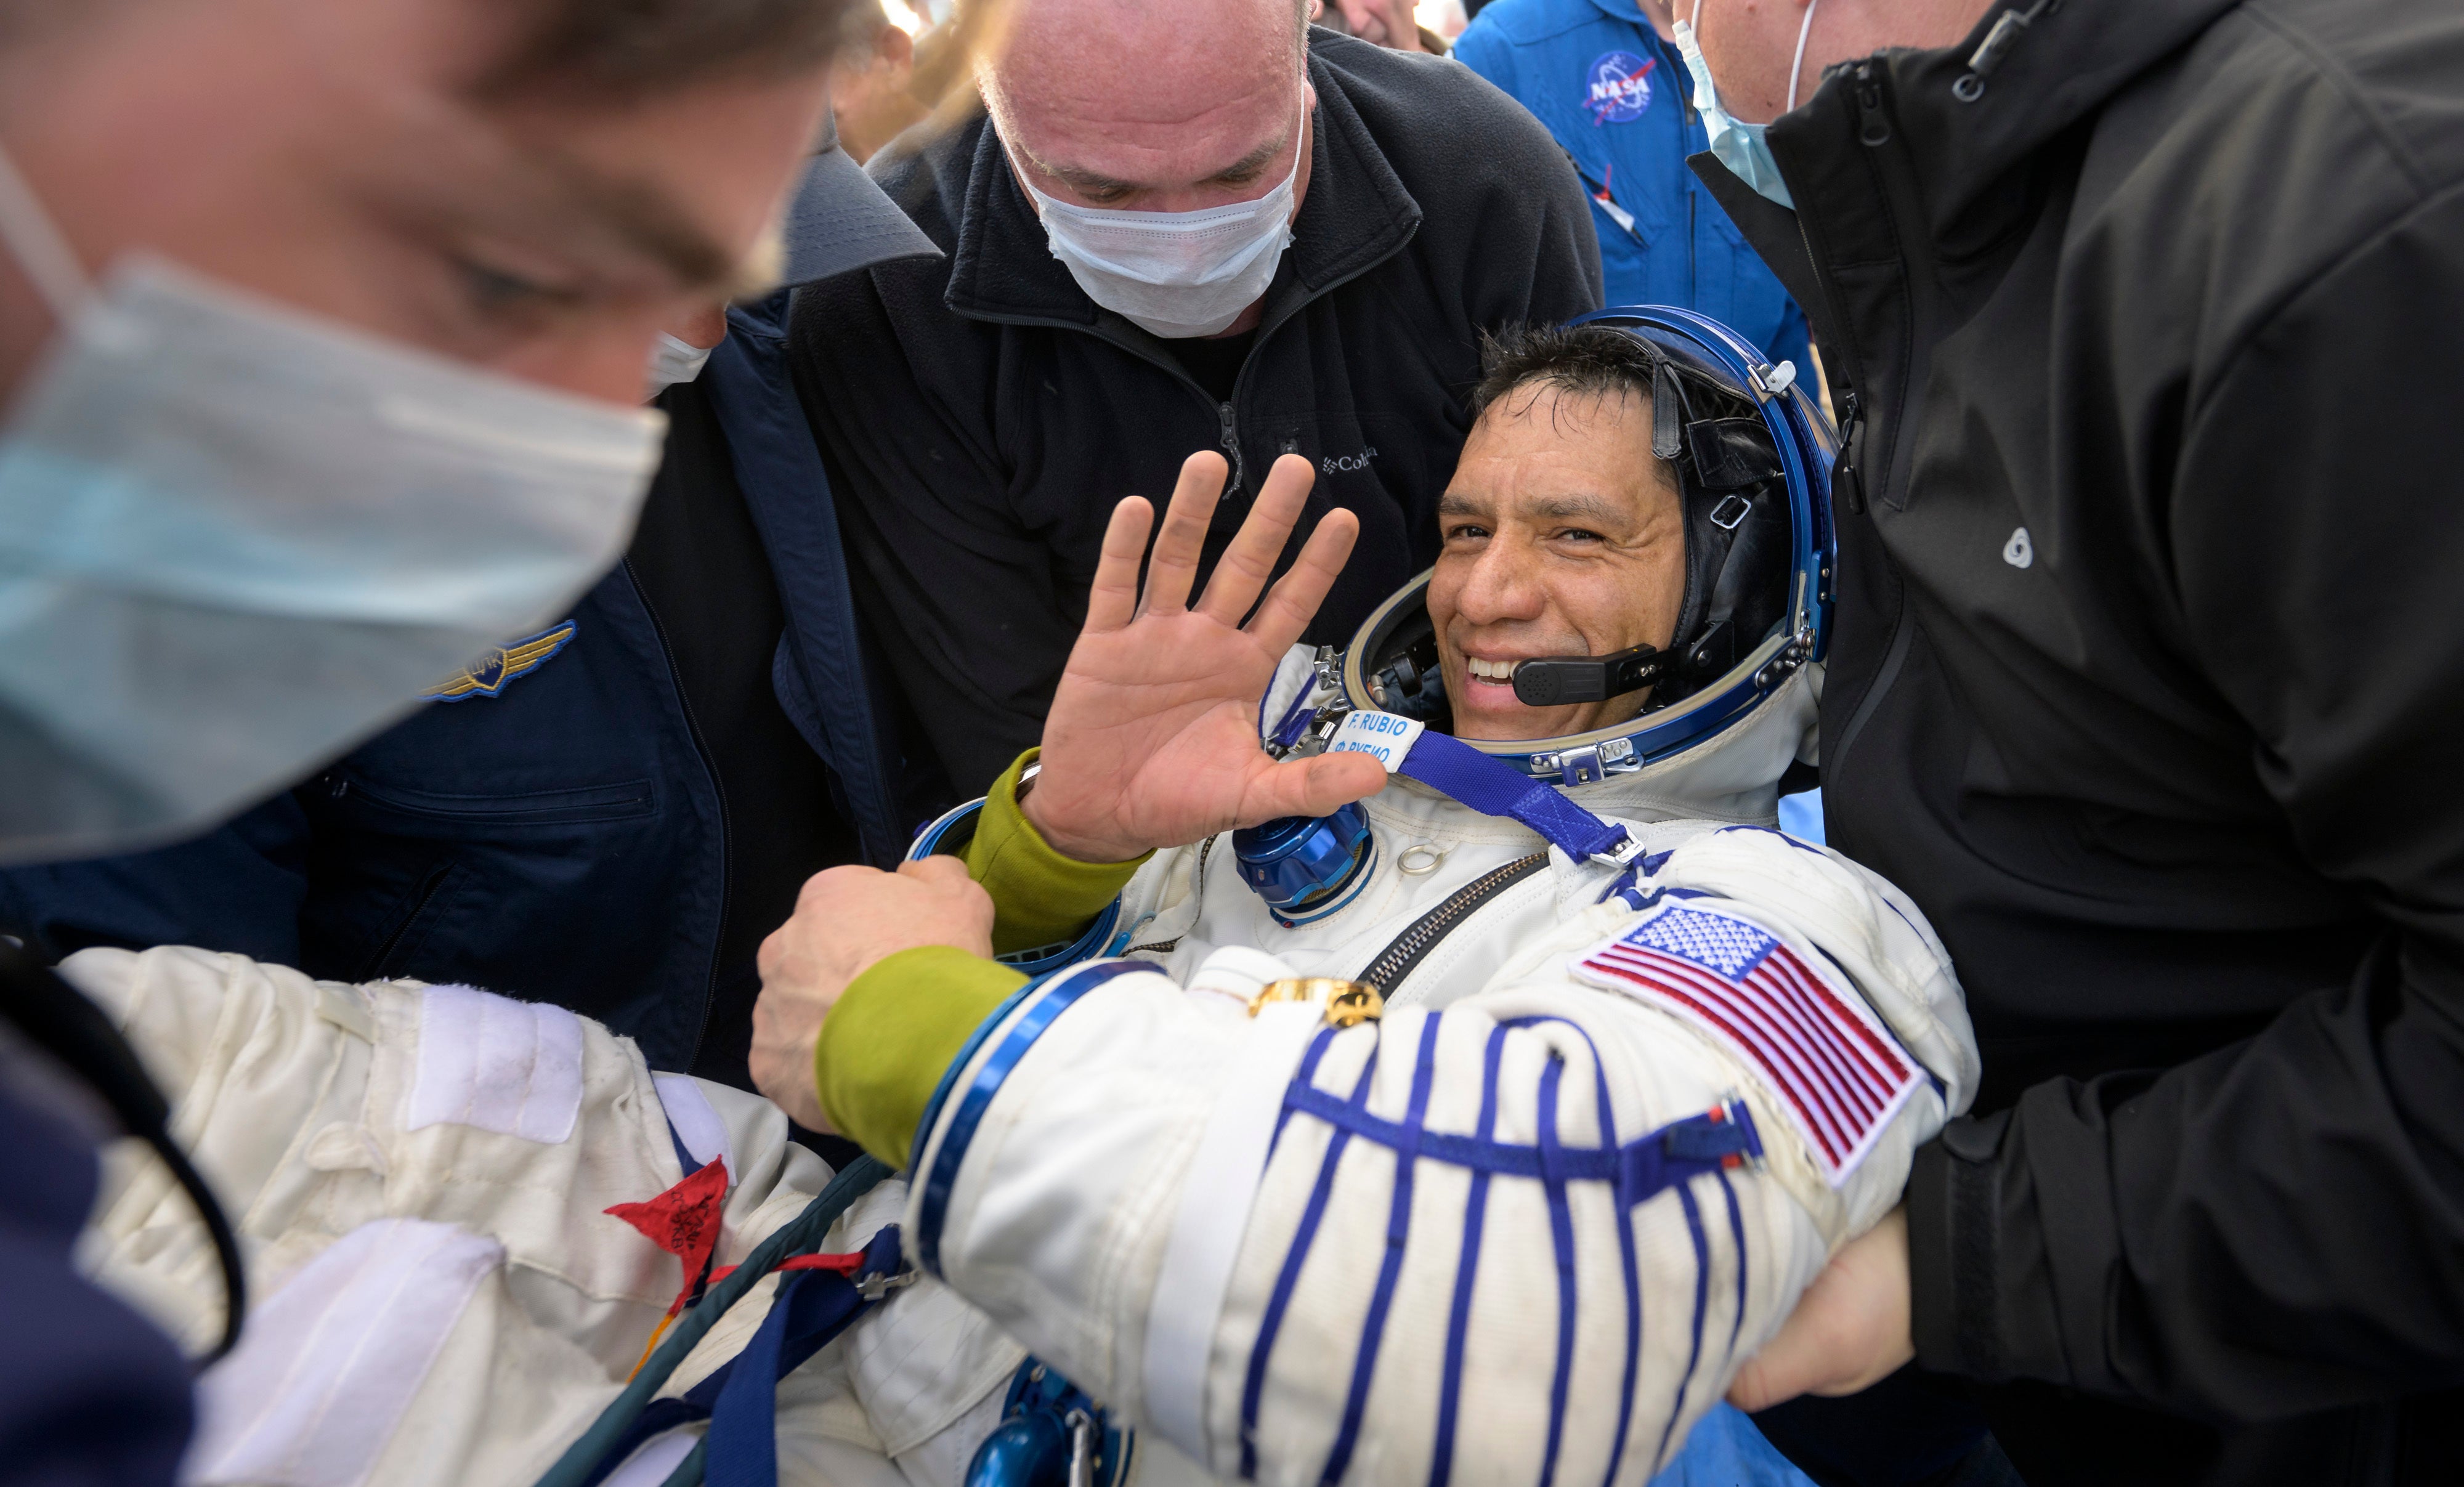 Frank Rubio is helped out of the Soyuz MS-23 spacecraft minutes after he and Russian cosmonauts Sergey Prokopyev and Dmitri Petelin landed in a remote area near the town of Zhezkazgan, Kazakhstan